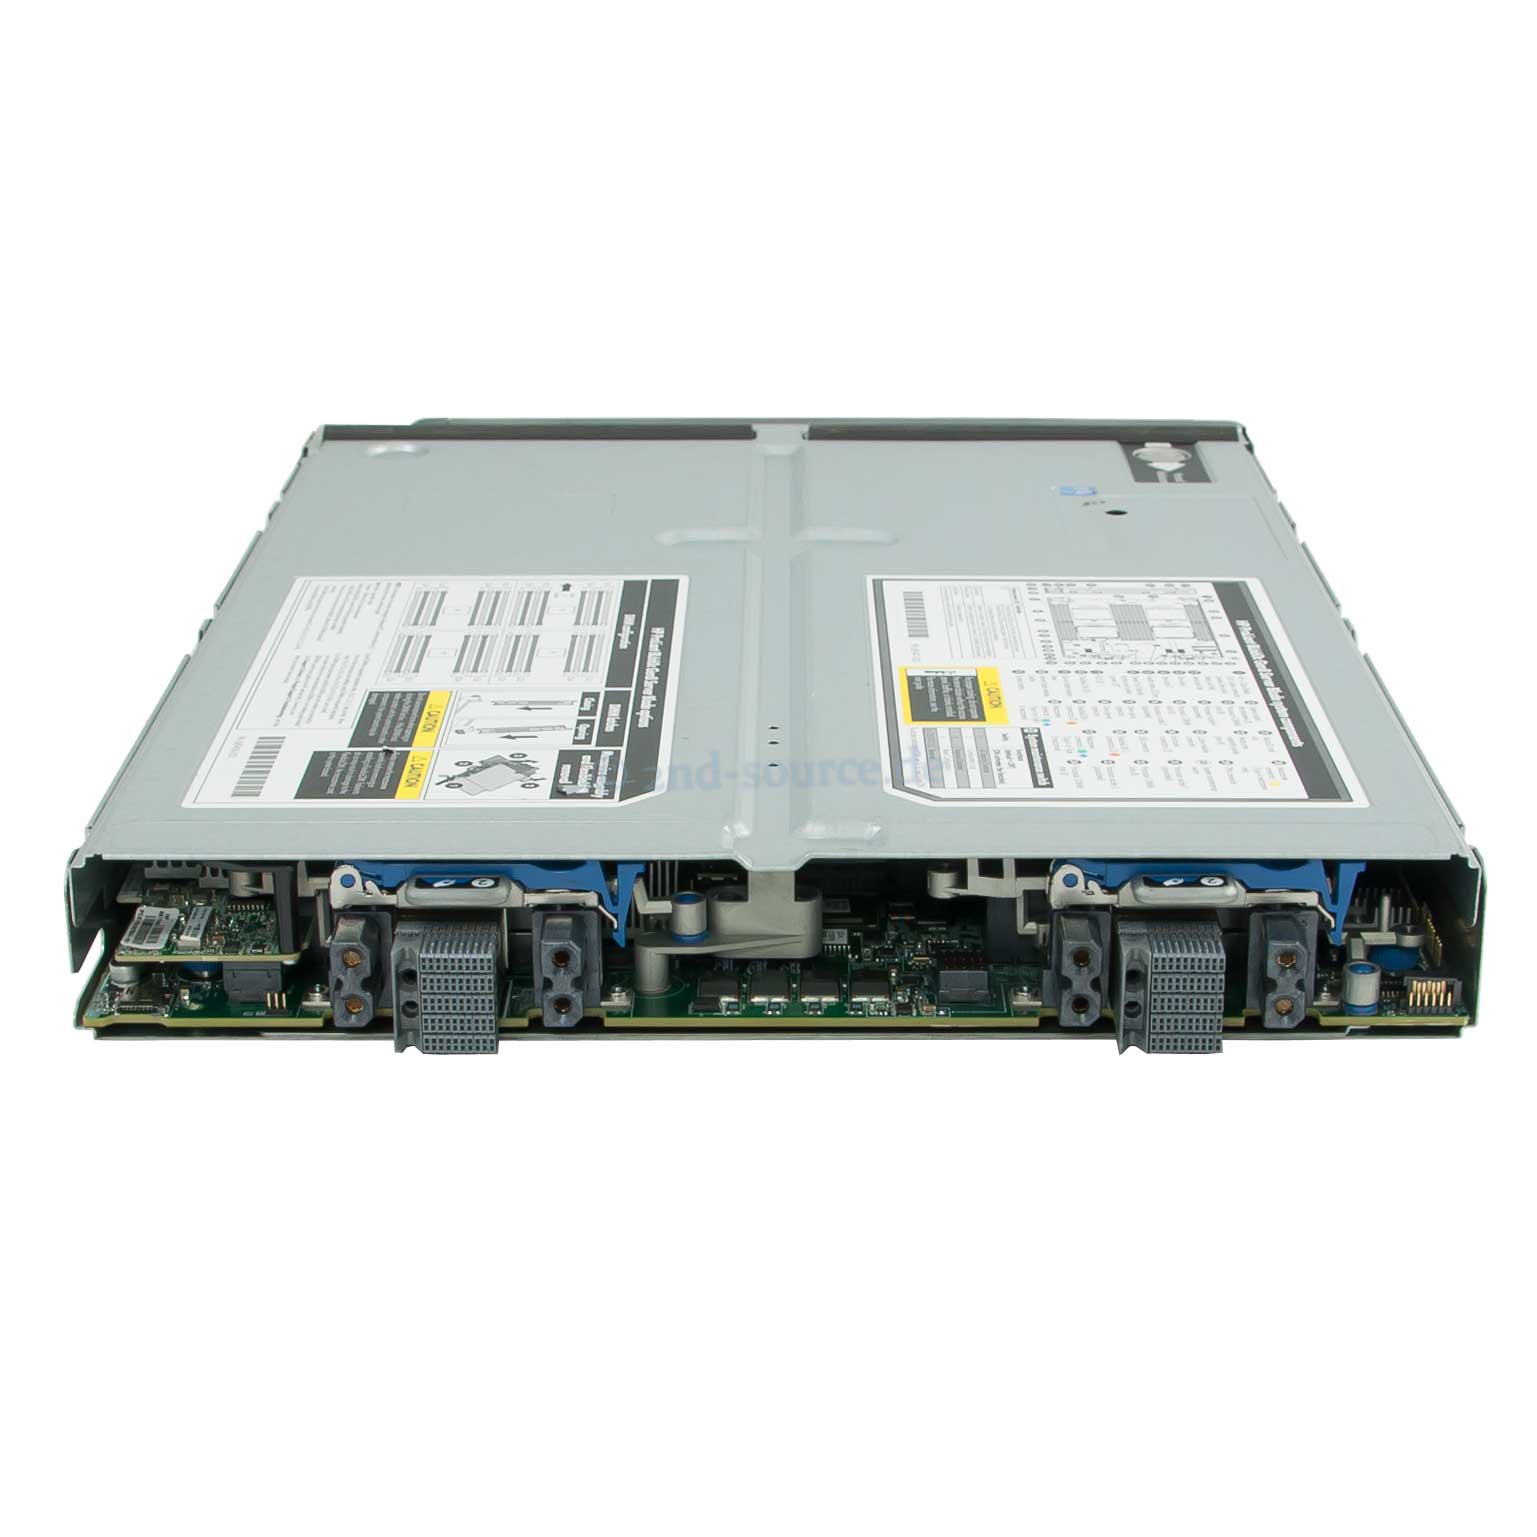 HPE BL660c G8 P220i 2x2.5'' SFF CTO Chassis 679118-B21 742361-001